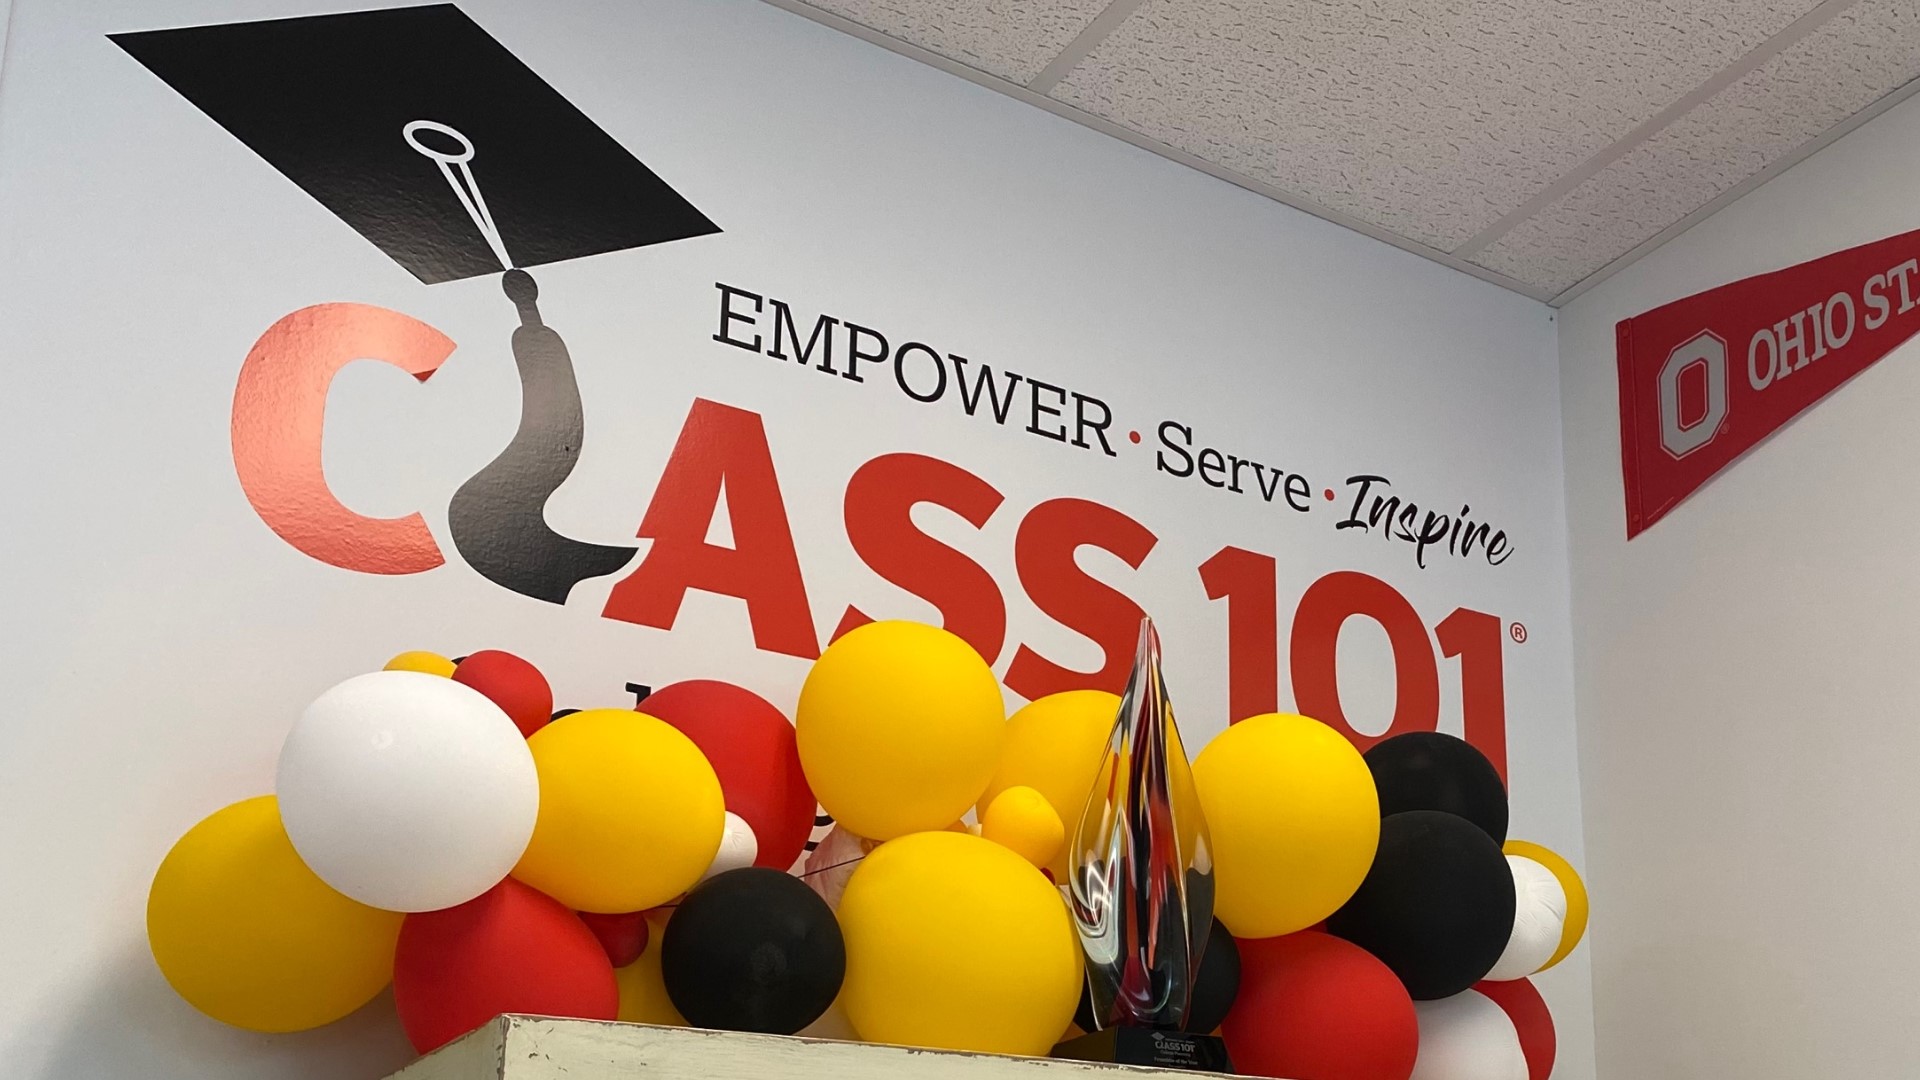 With offices in both Carmel and Bloomington, the organization's mission is to empower students and serve families through the entire college admissions process.